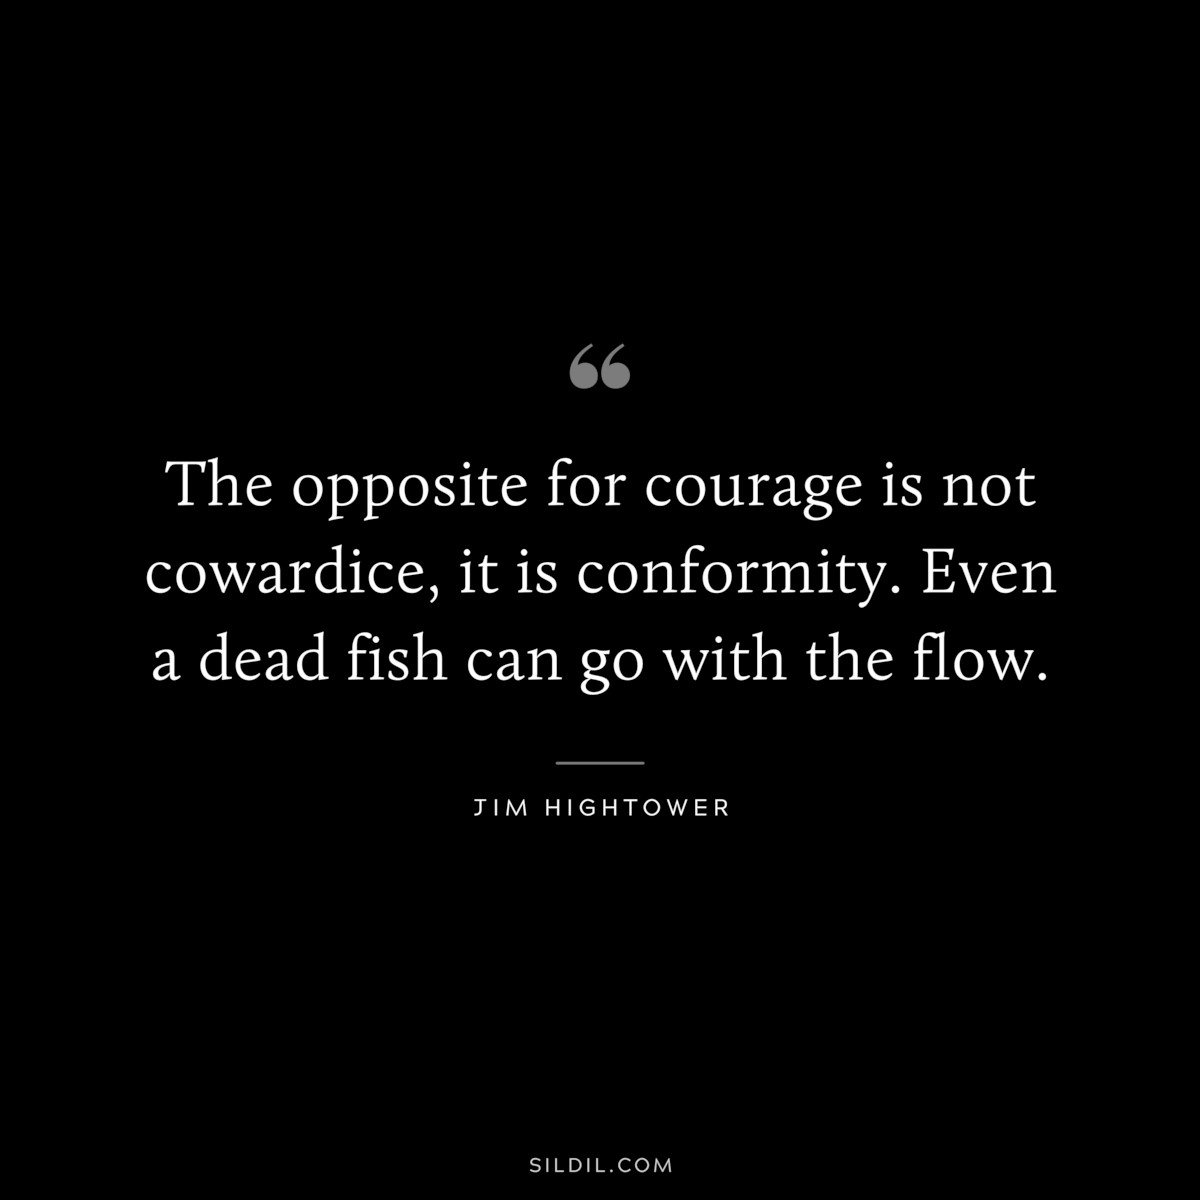 The opposite for courage is not cowardice, it is conformity. Even a dead fish can go with the flow. ― Jim Hightower